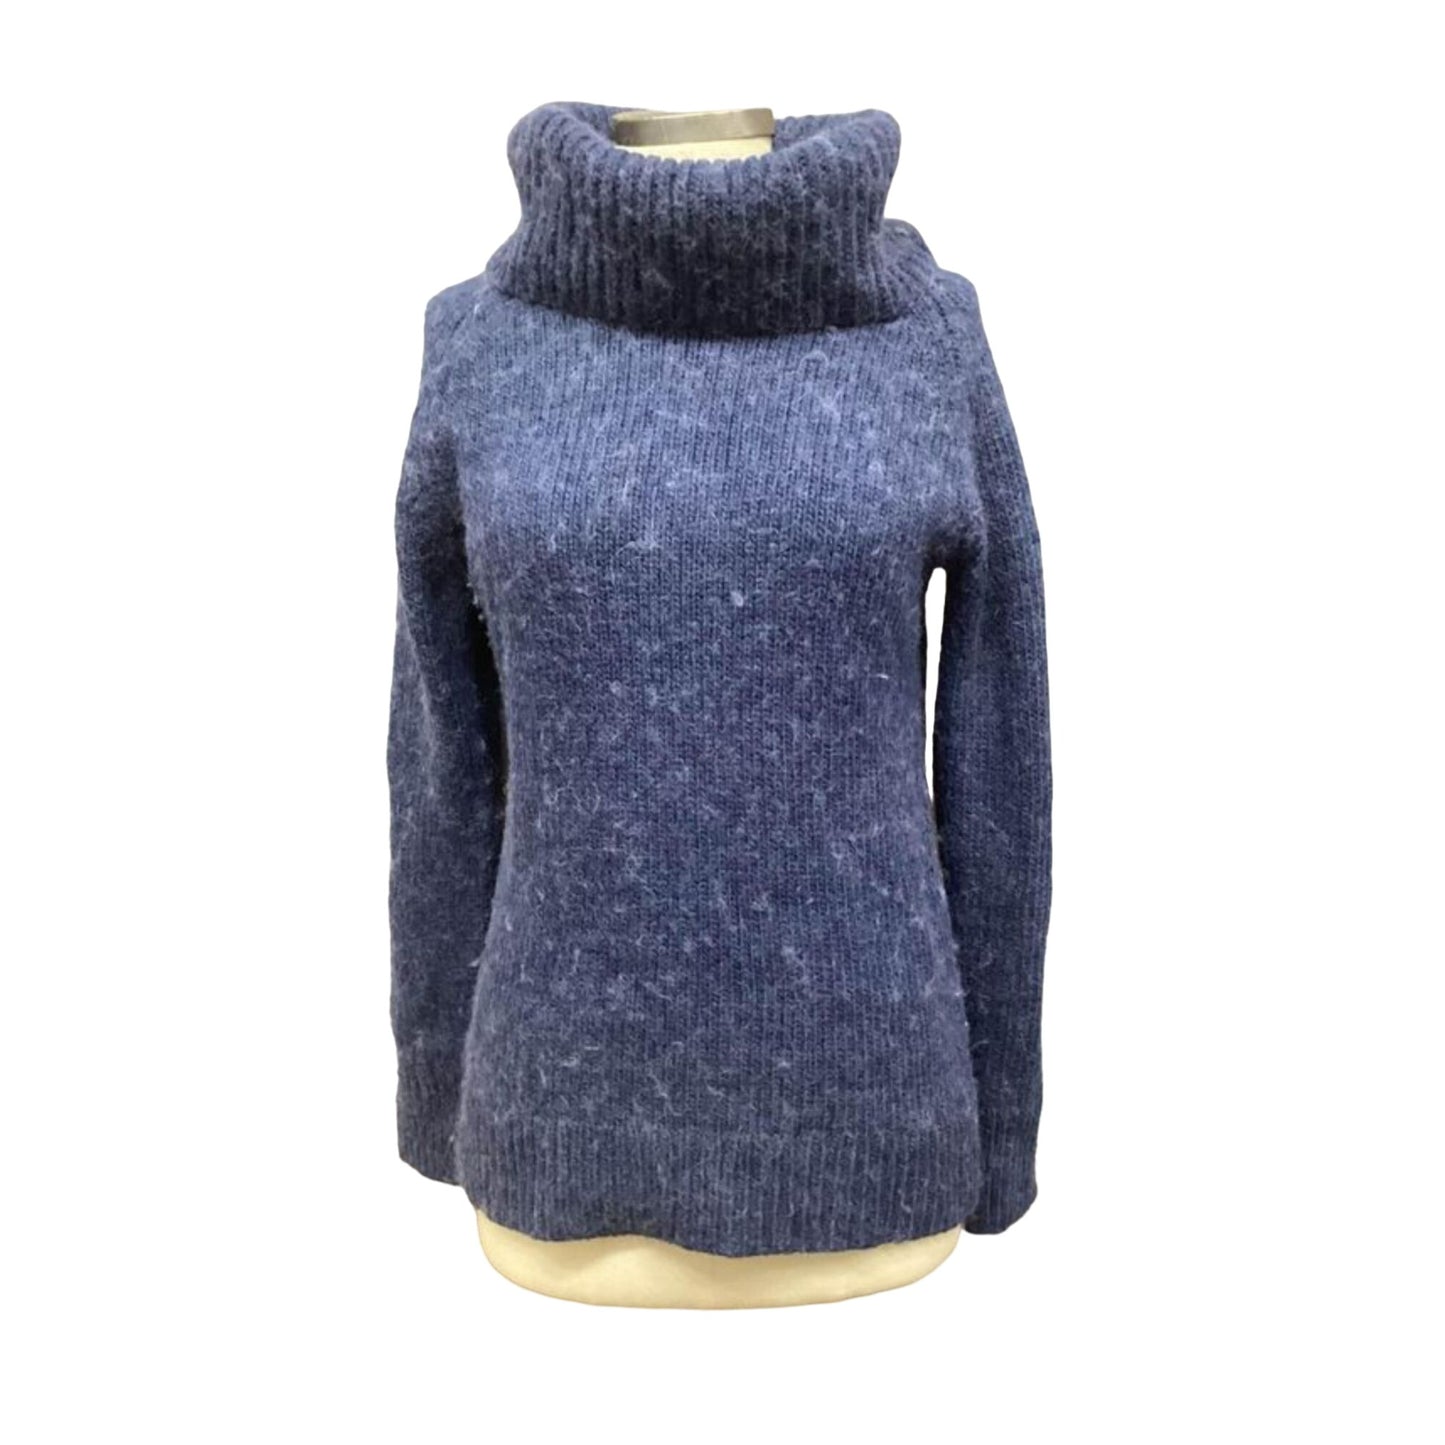 Womens Guide Series Chunky Sweater